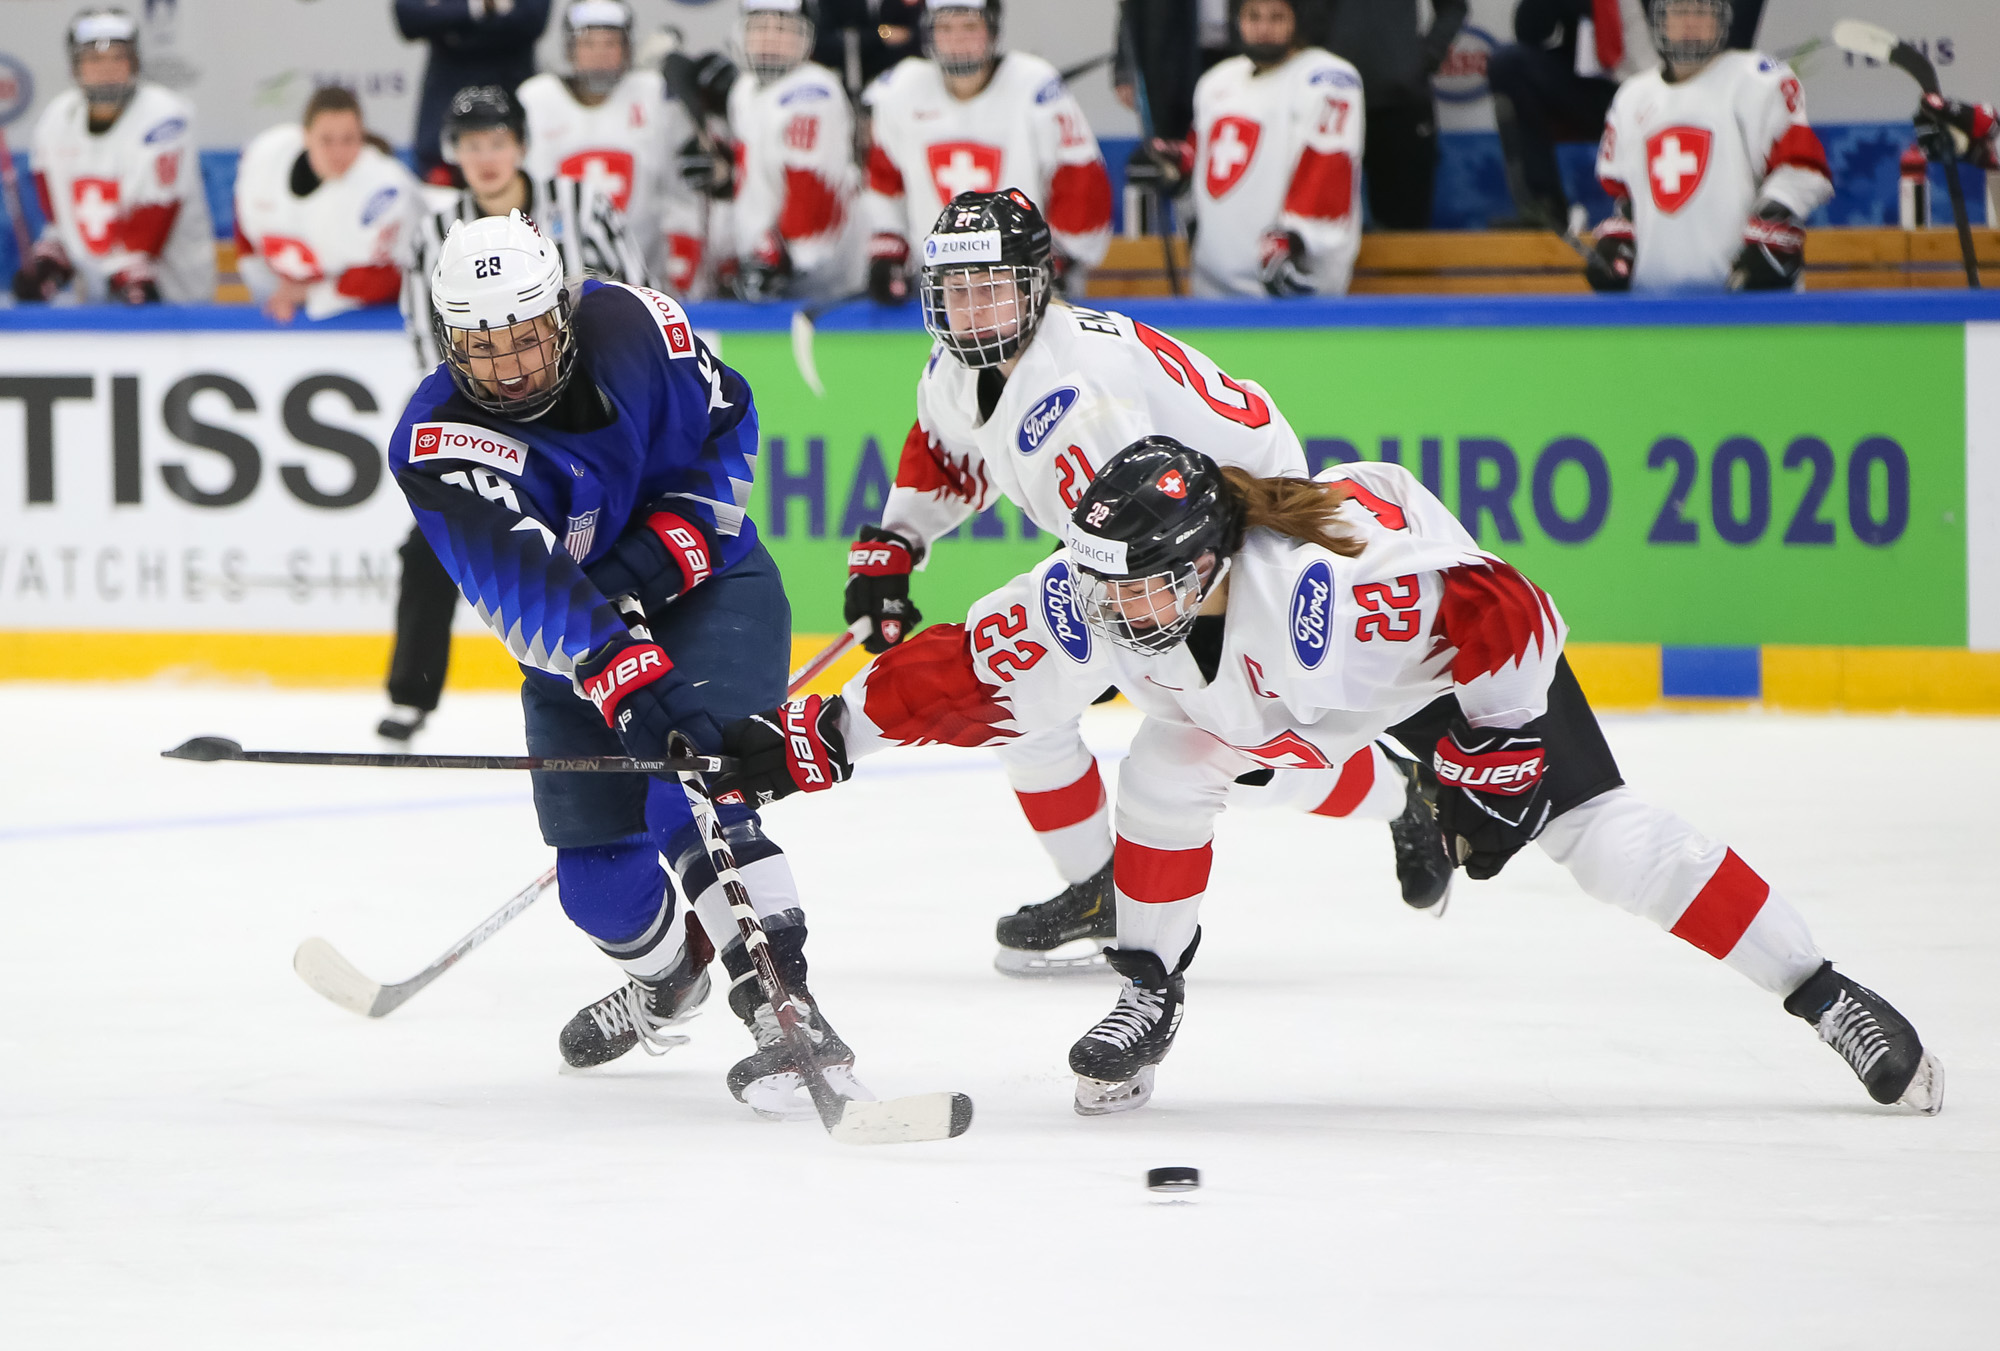 Sports News Roundup: Olympics-Ice hockey-No plans to remove China team from  Winter Games - IIHF; Soccer-Blatter, Platini charged with fraud by Swiss  authorities and more